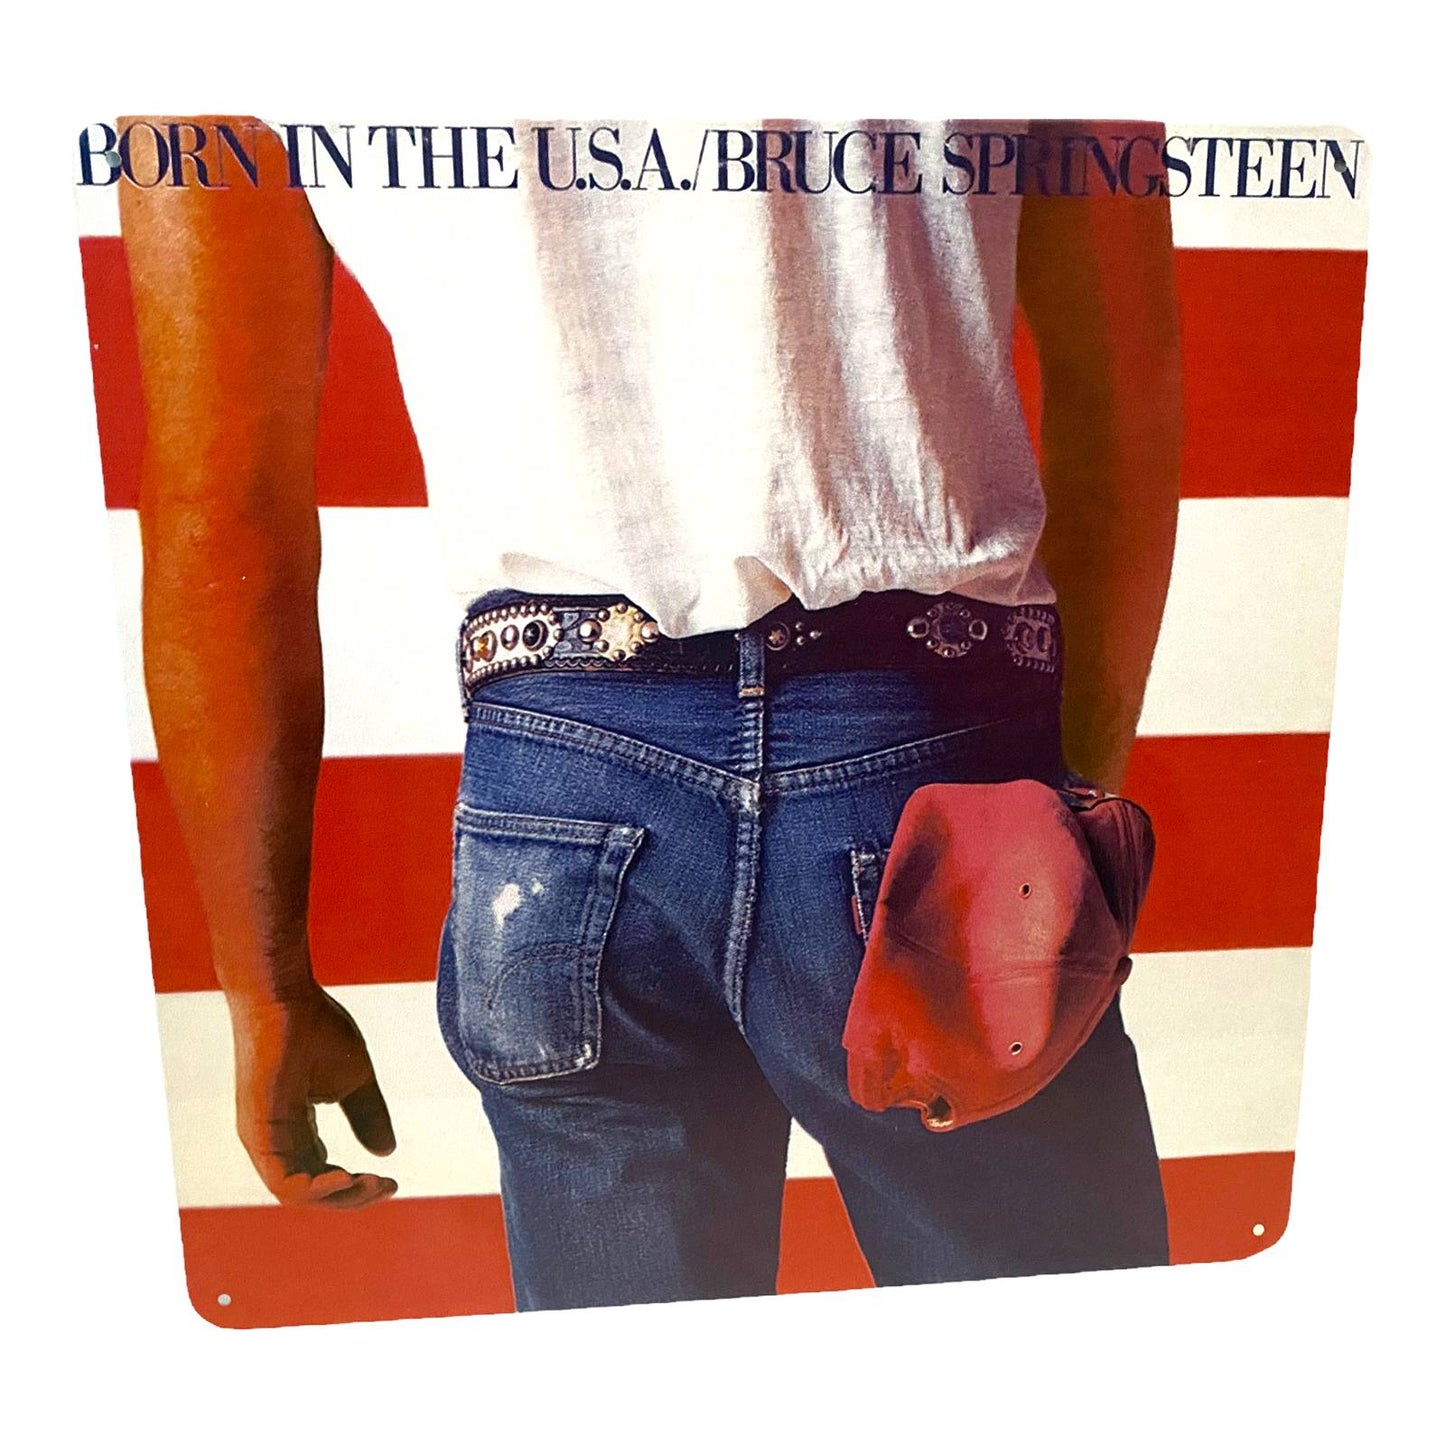 Bruce Springsteen - Born in The USA Album Cover Metal Print Tin Sign 12"x 12"